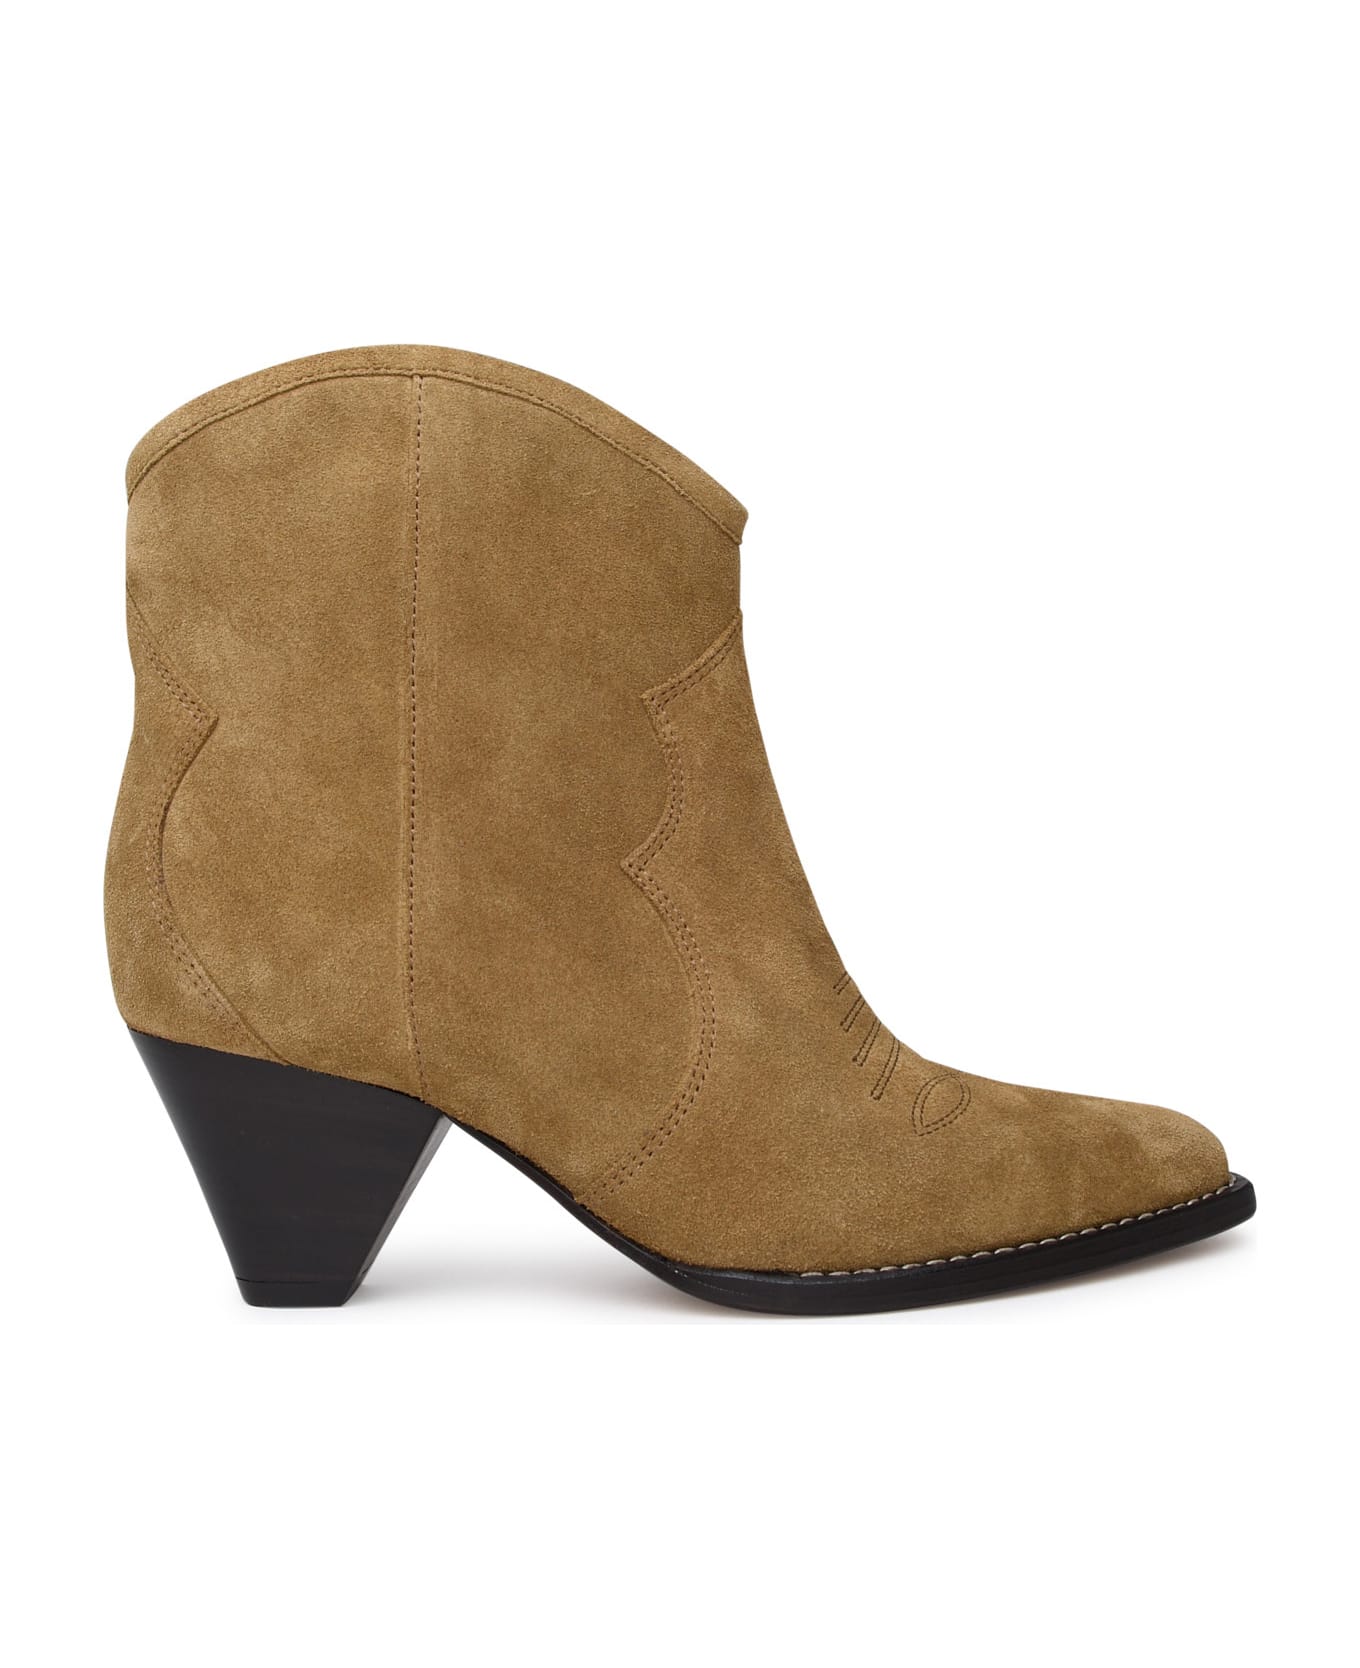 Isabel Marant Darizo Suede Ankle Boots - Brown ブーツ